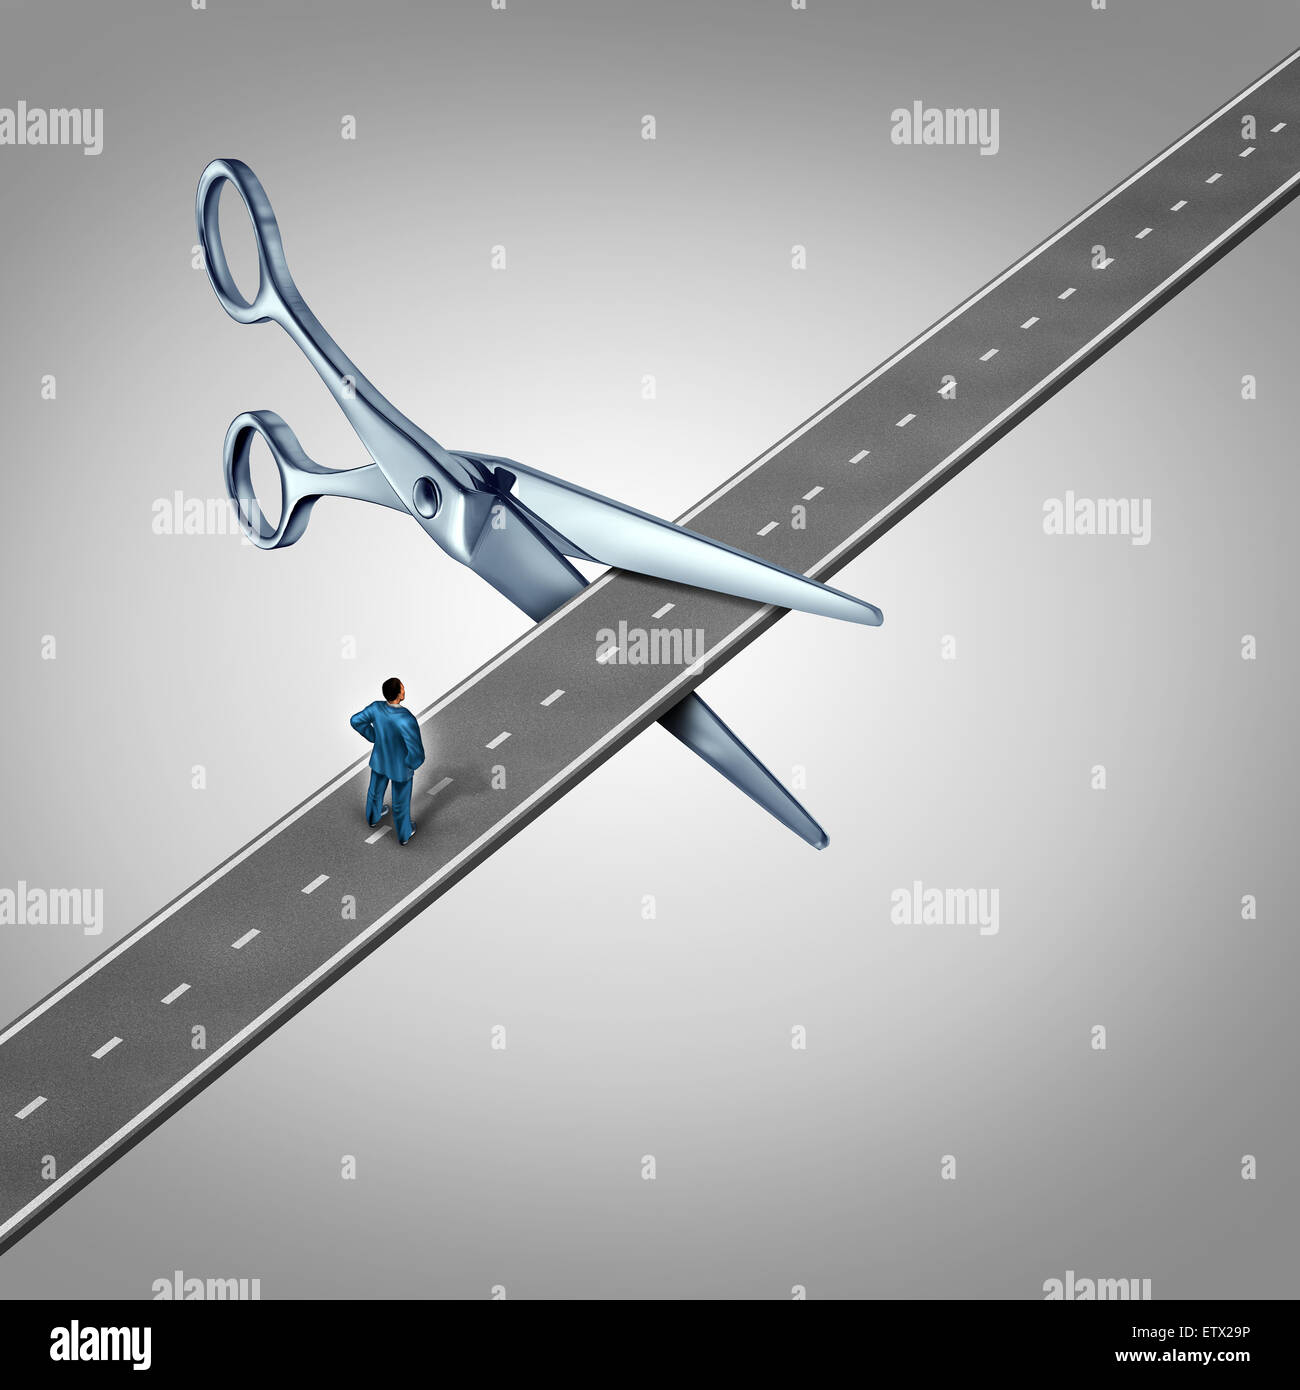 Work interruption concept and interrupted career path as a businessman on a road  that is being cut by scissors as a layoff metaphor and symbol for job and employment limits or cutting benefits and opportunity for promotion or advancement. Stock Photo